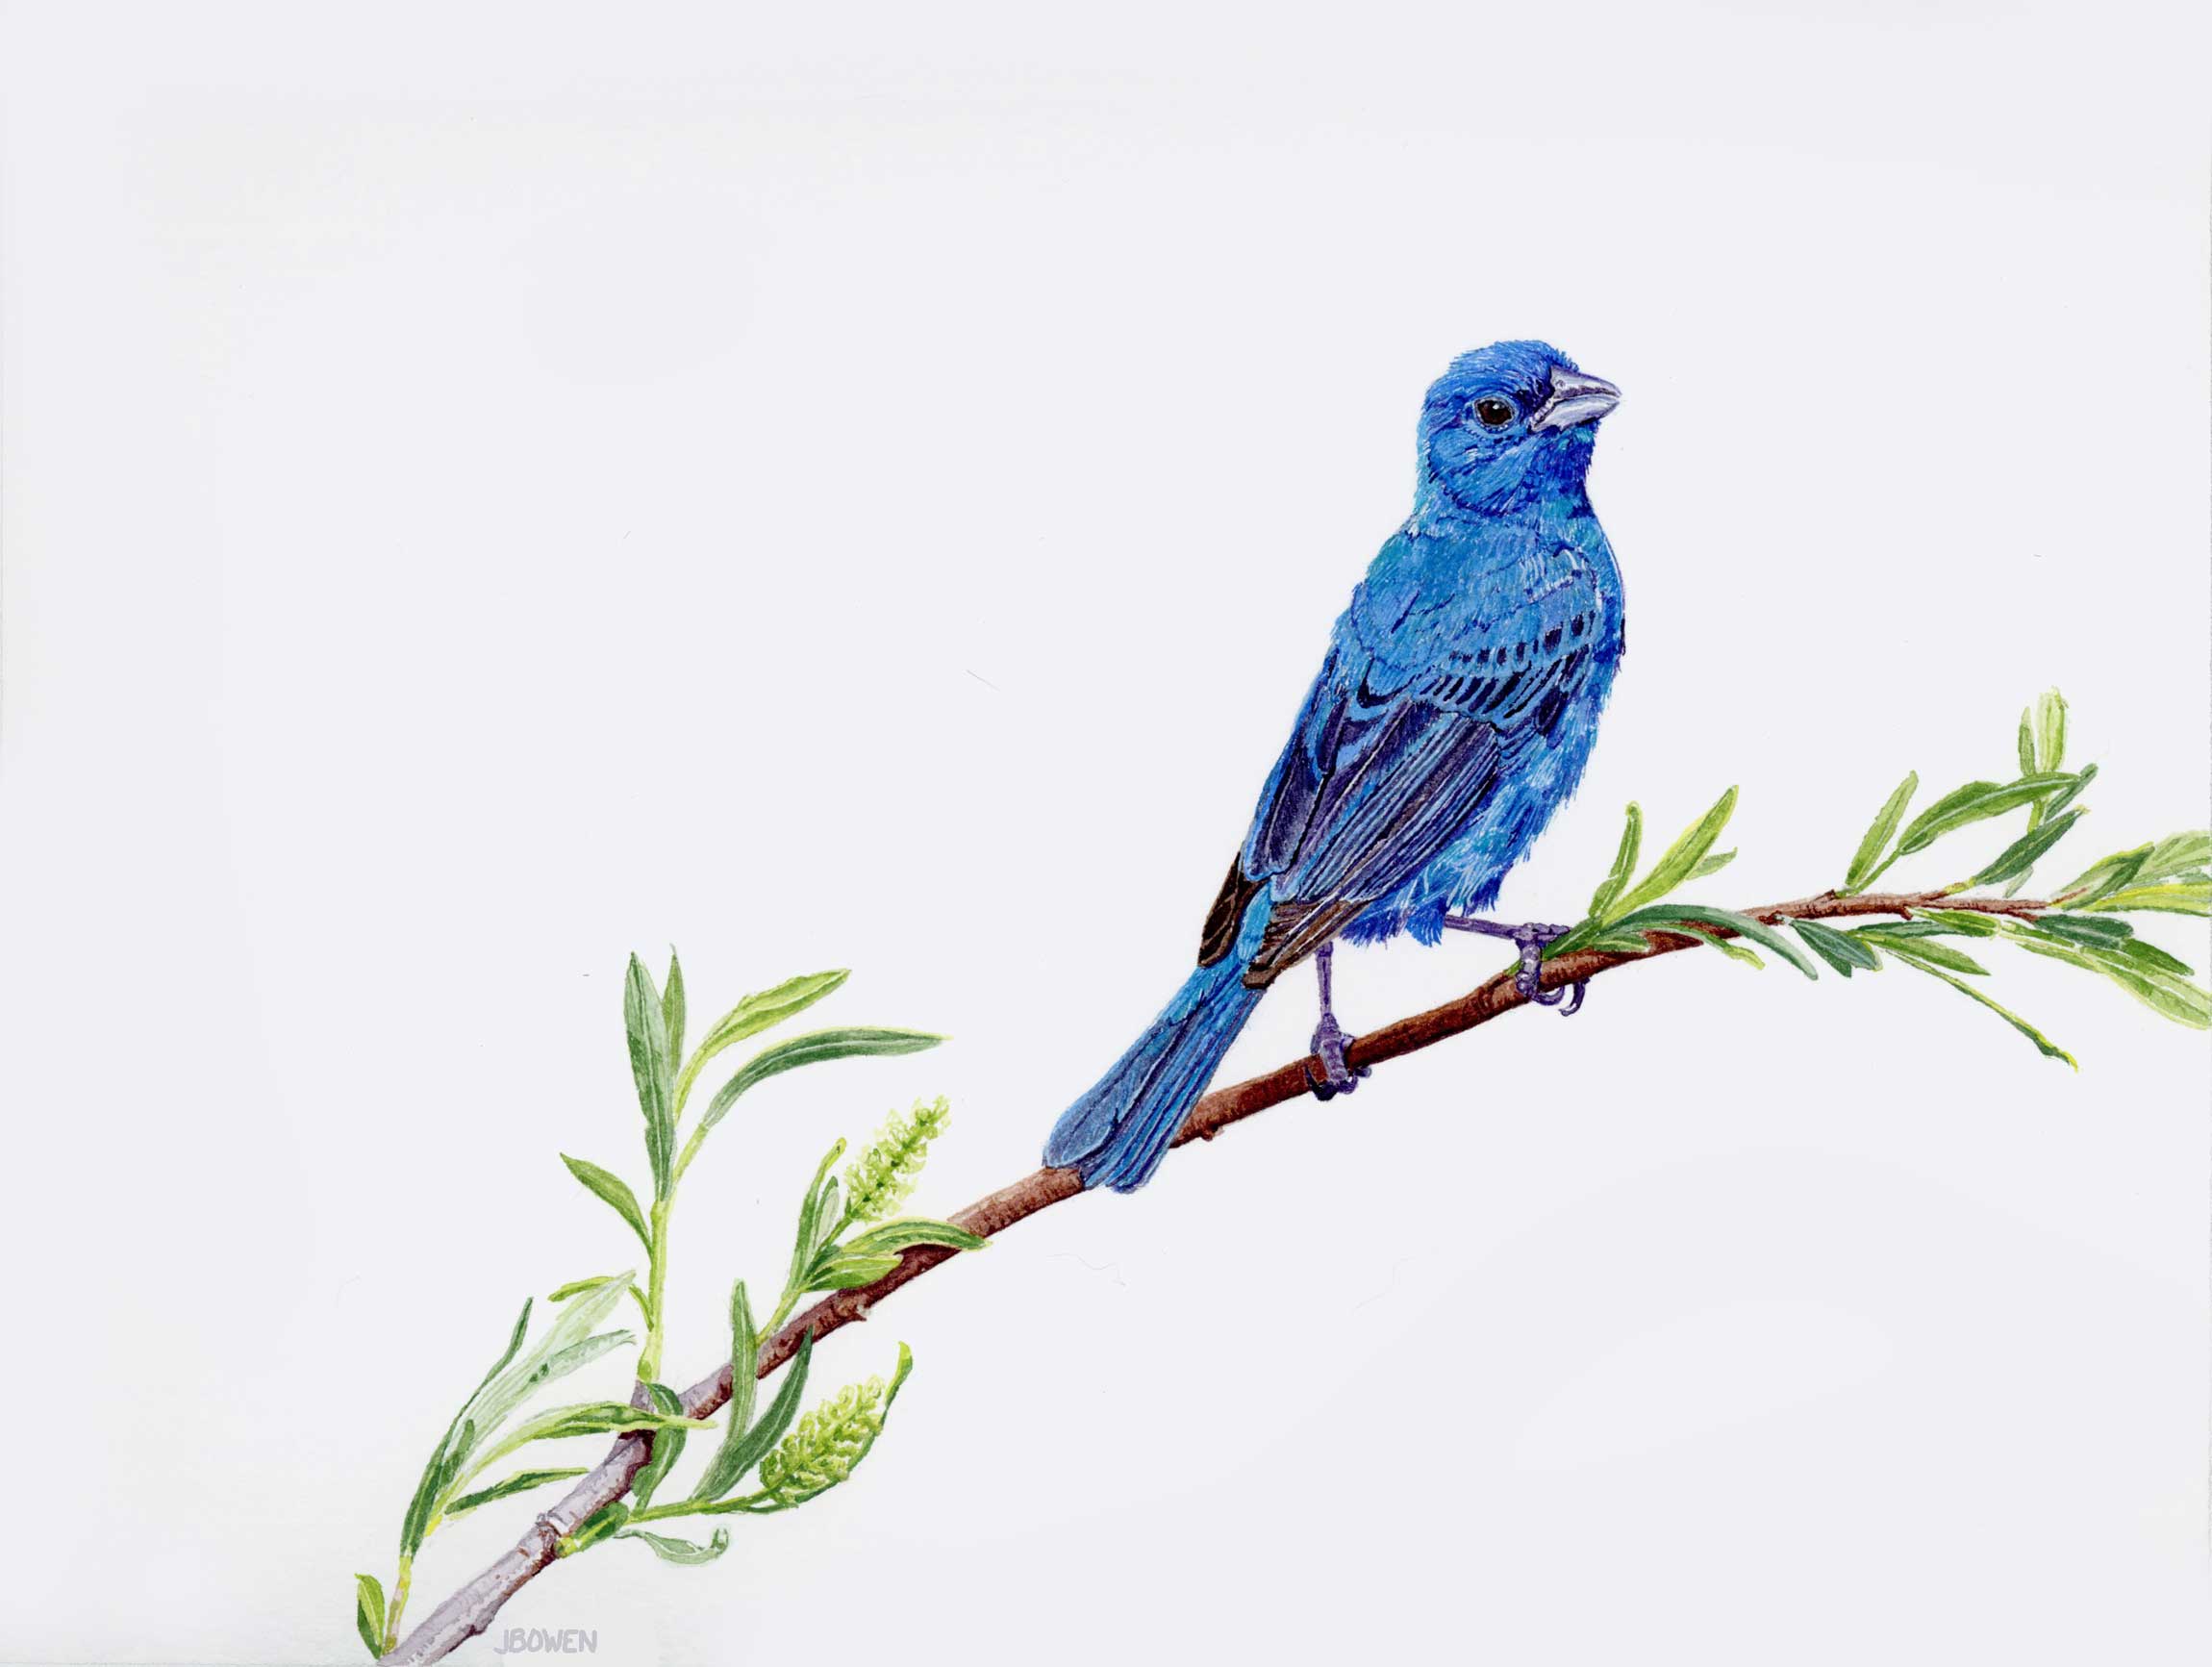 “Out of the Blue – Indigo Bunting”